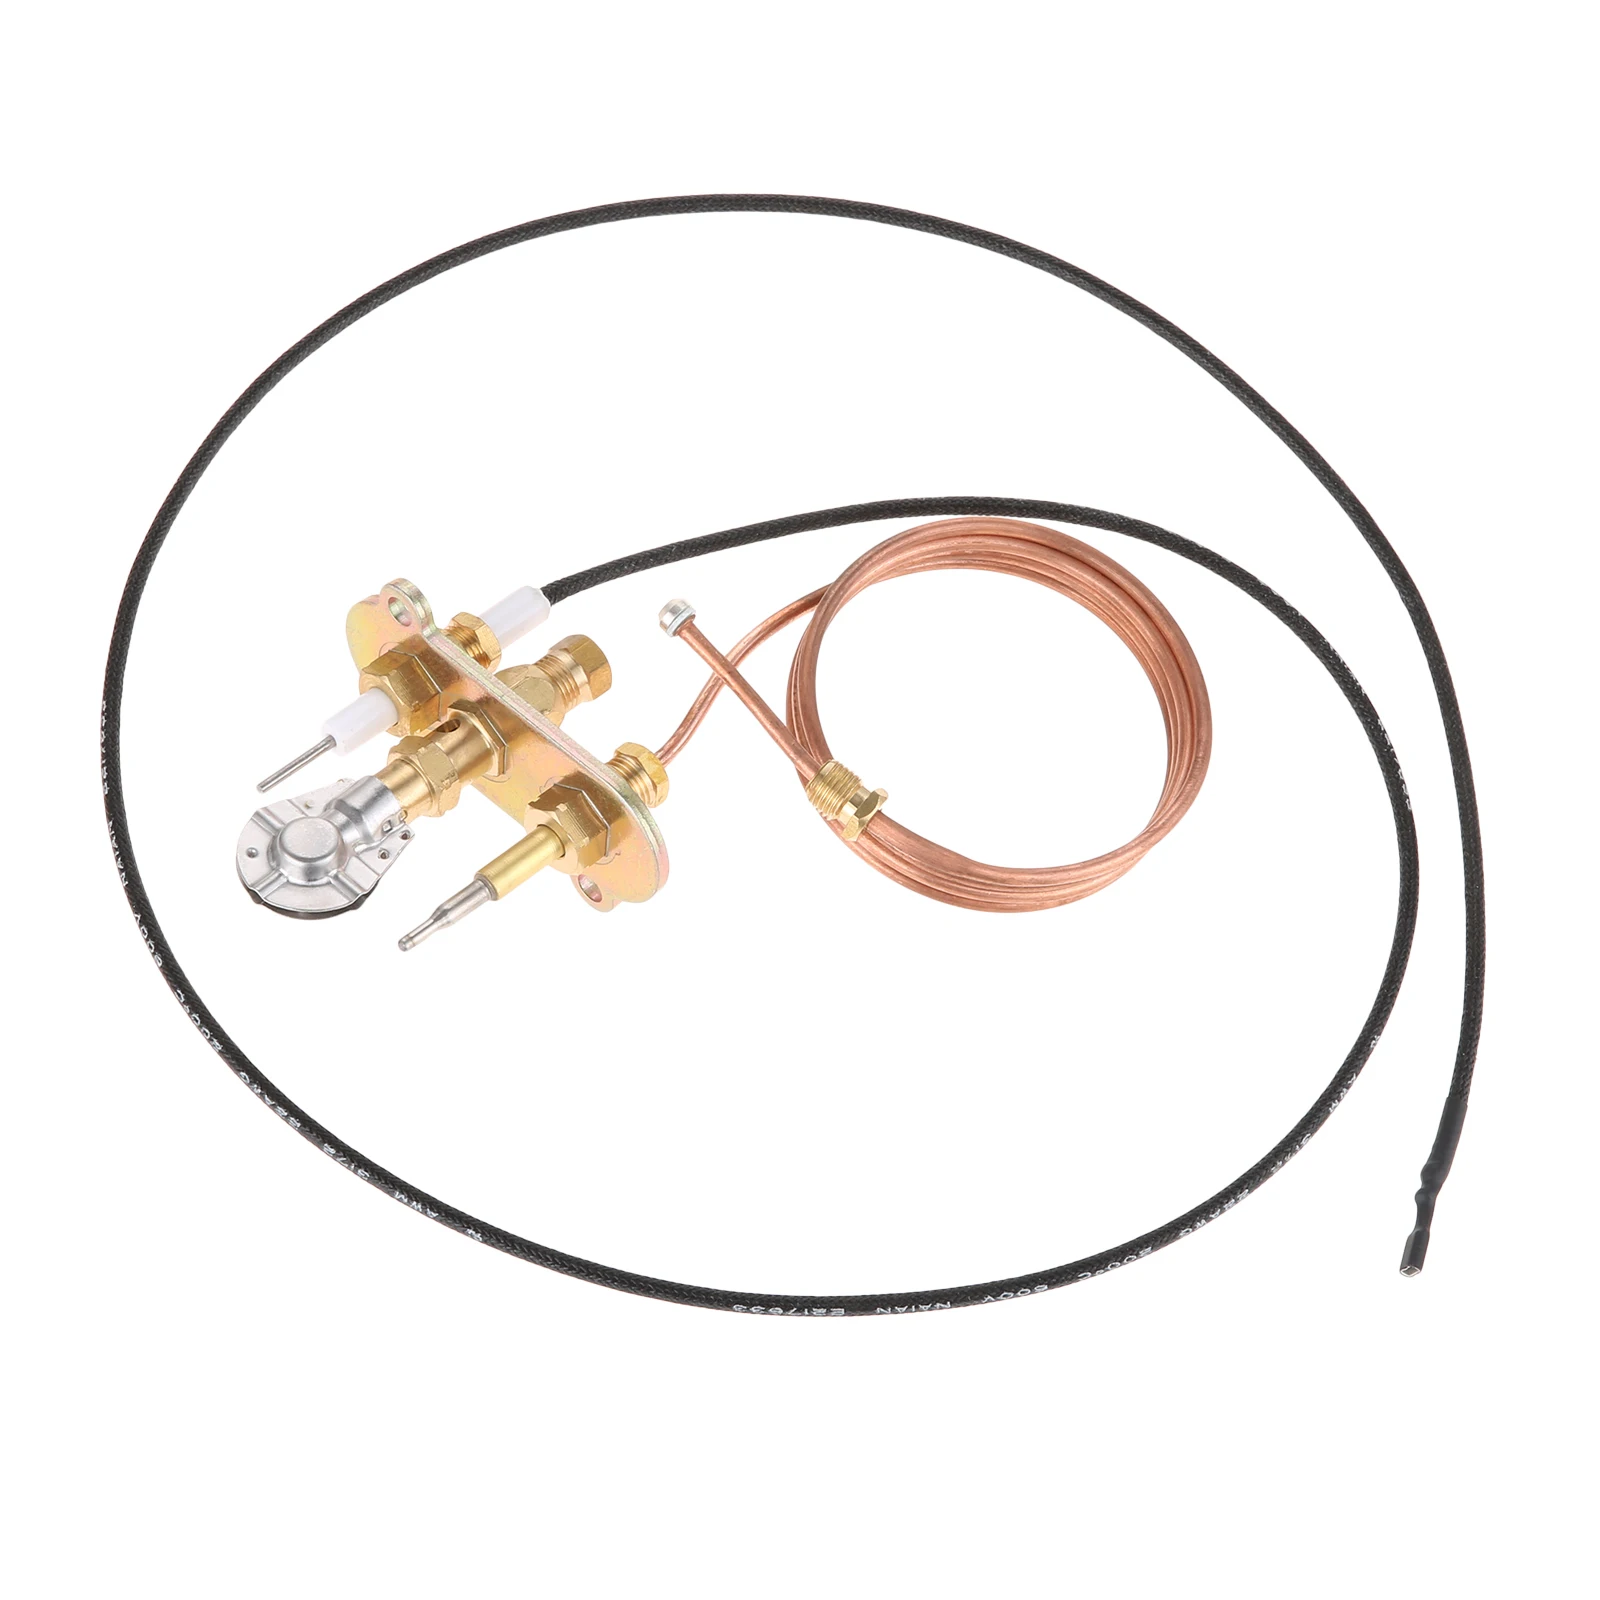 

1set Liquefied Gas M8*1 Thermocouple and Ignition 900mm Pilot Burner kit for Fireplace/Thermocouple Gas Water Heater Replacement